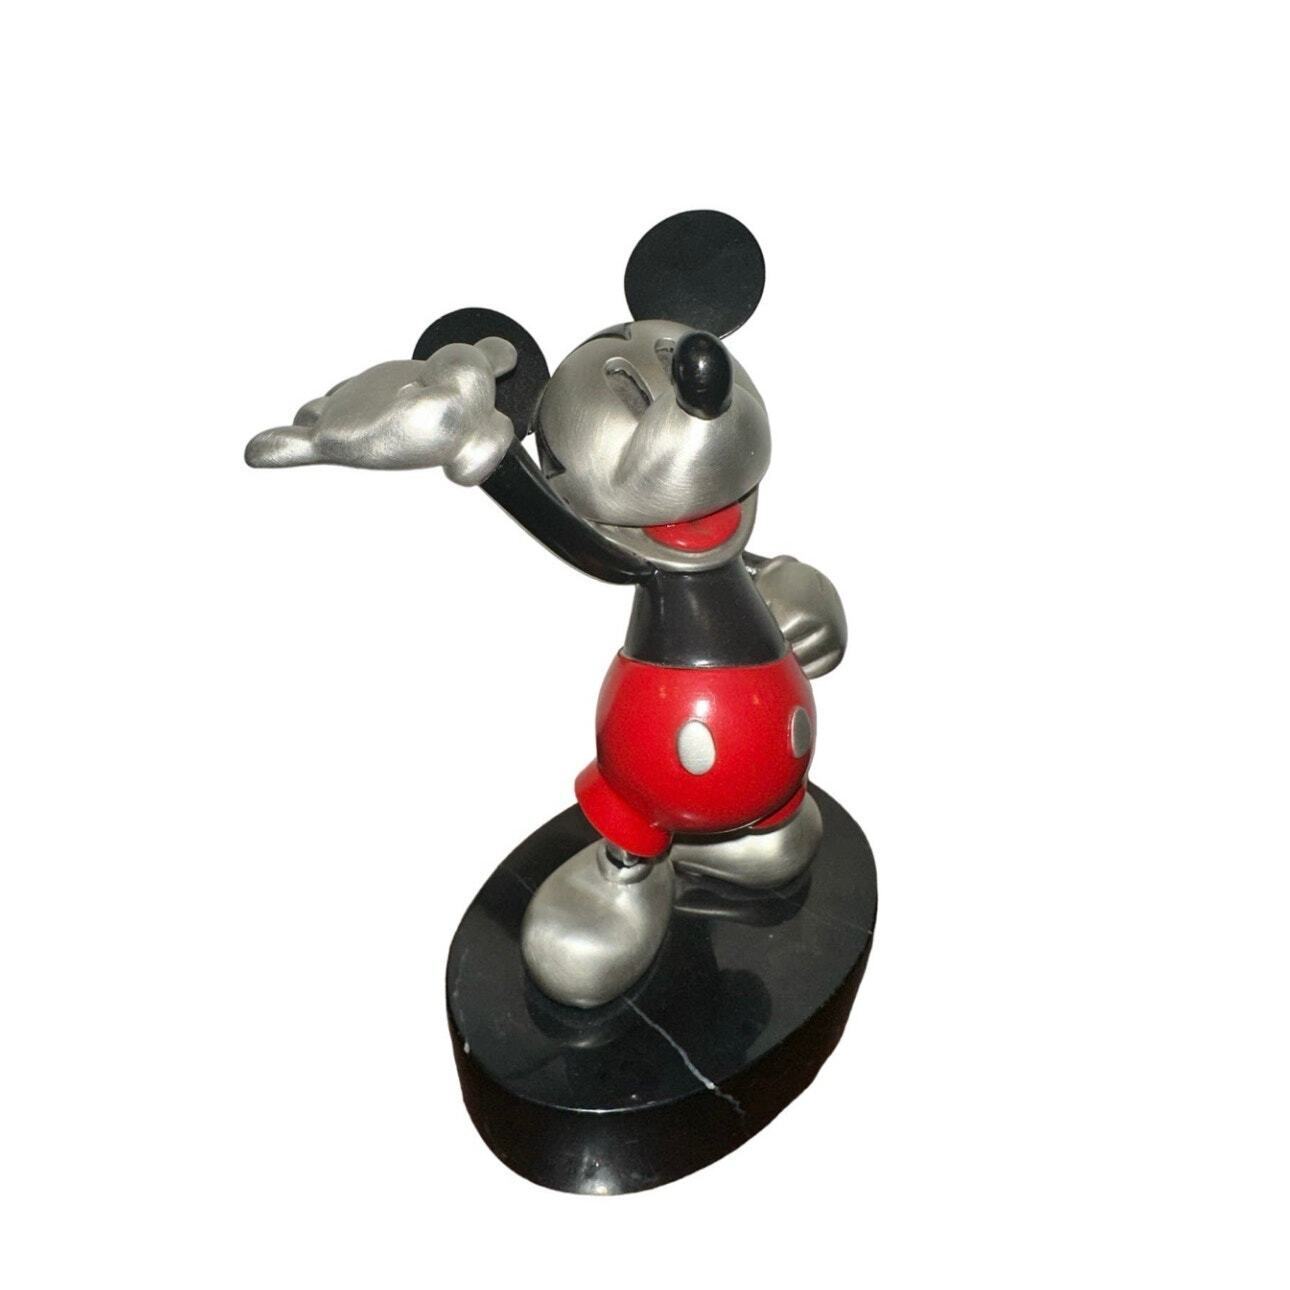 Chillmark “Mouse In A Million” Pewter /500 Mickey Mouse Statue - Disney - Rare